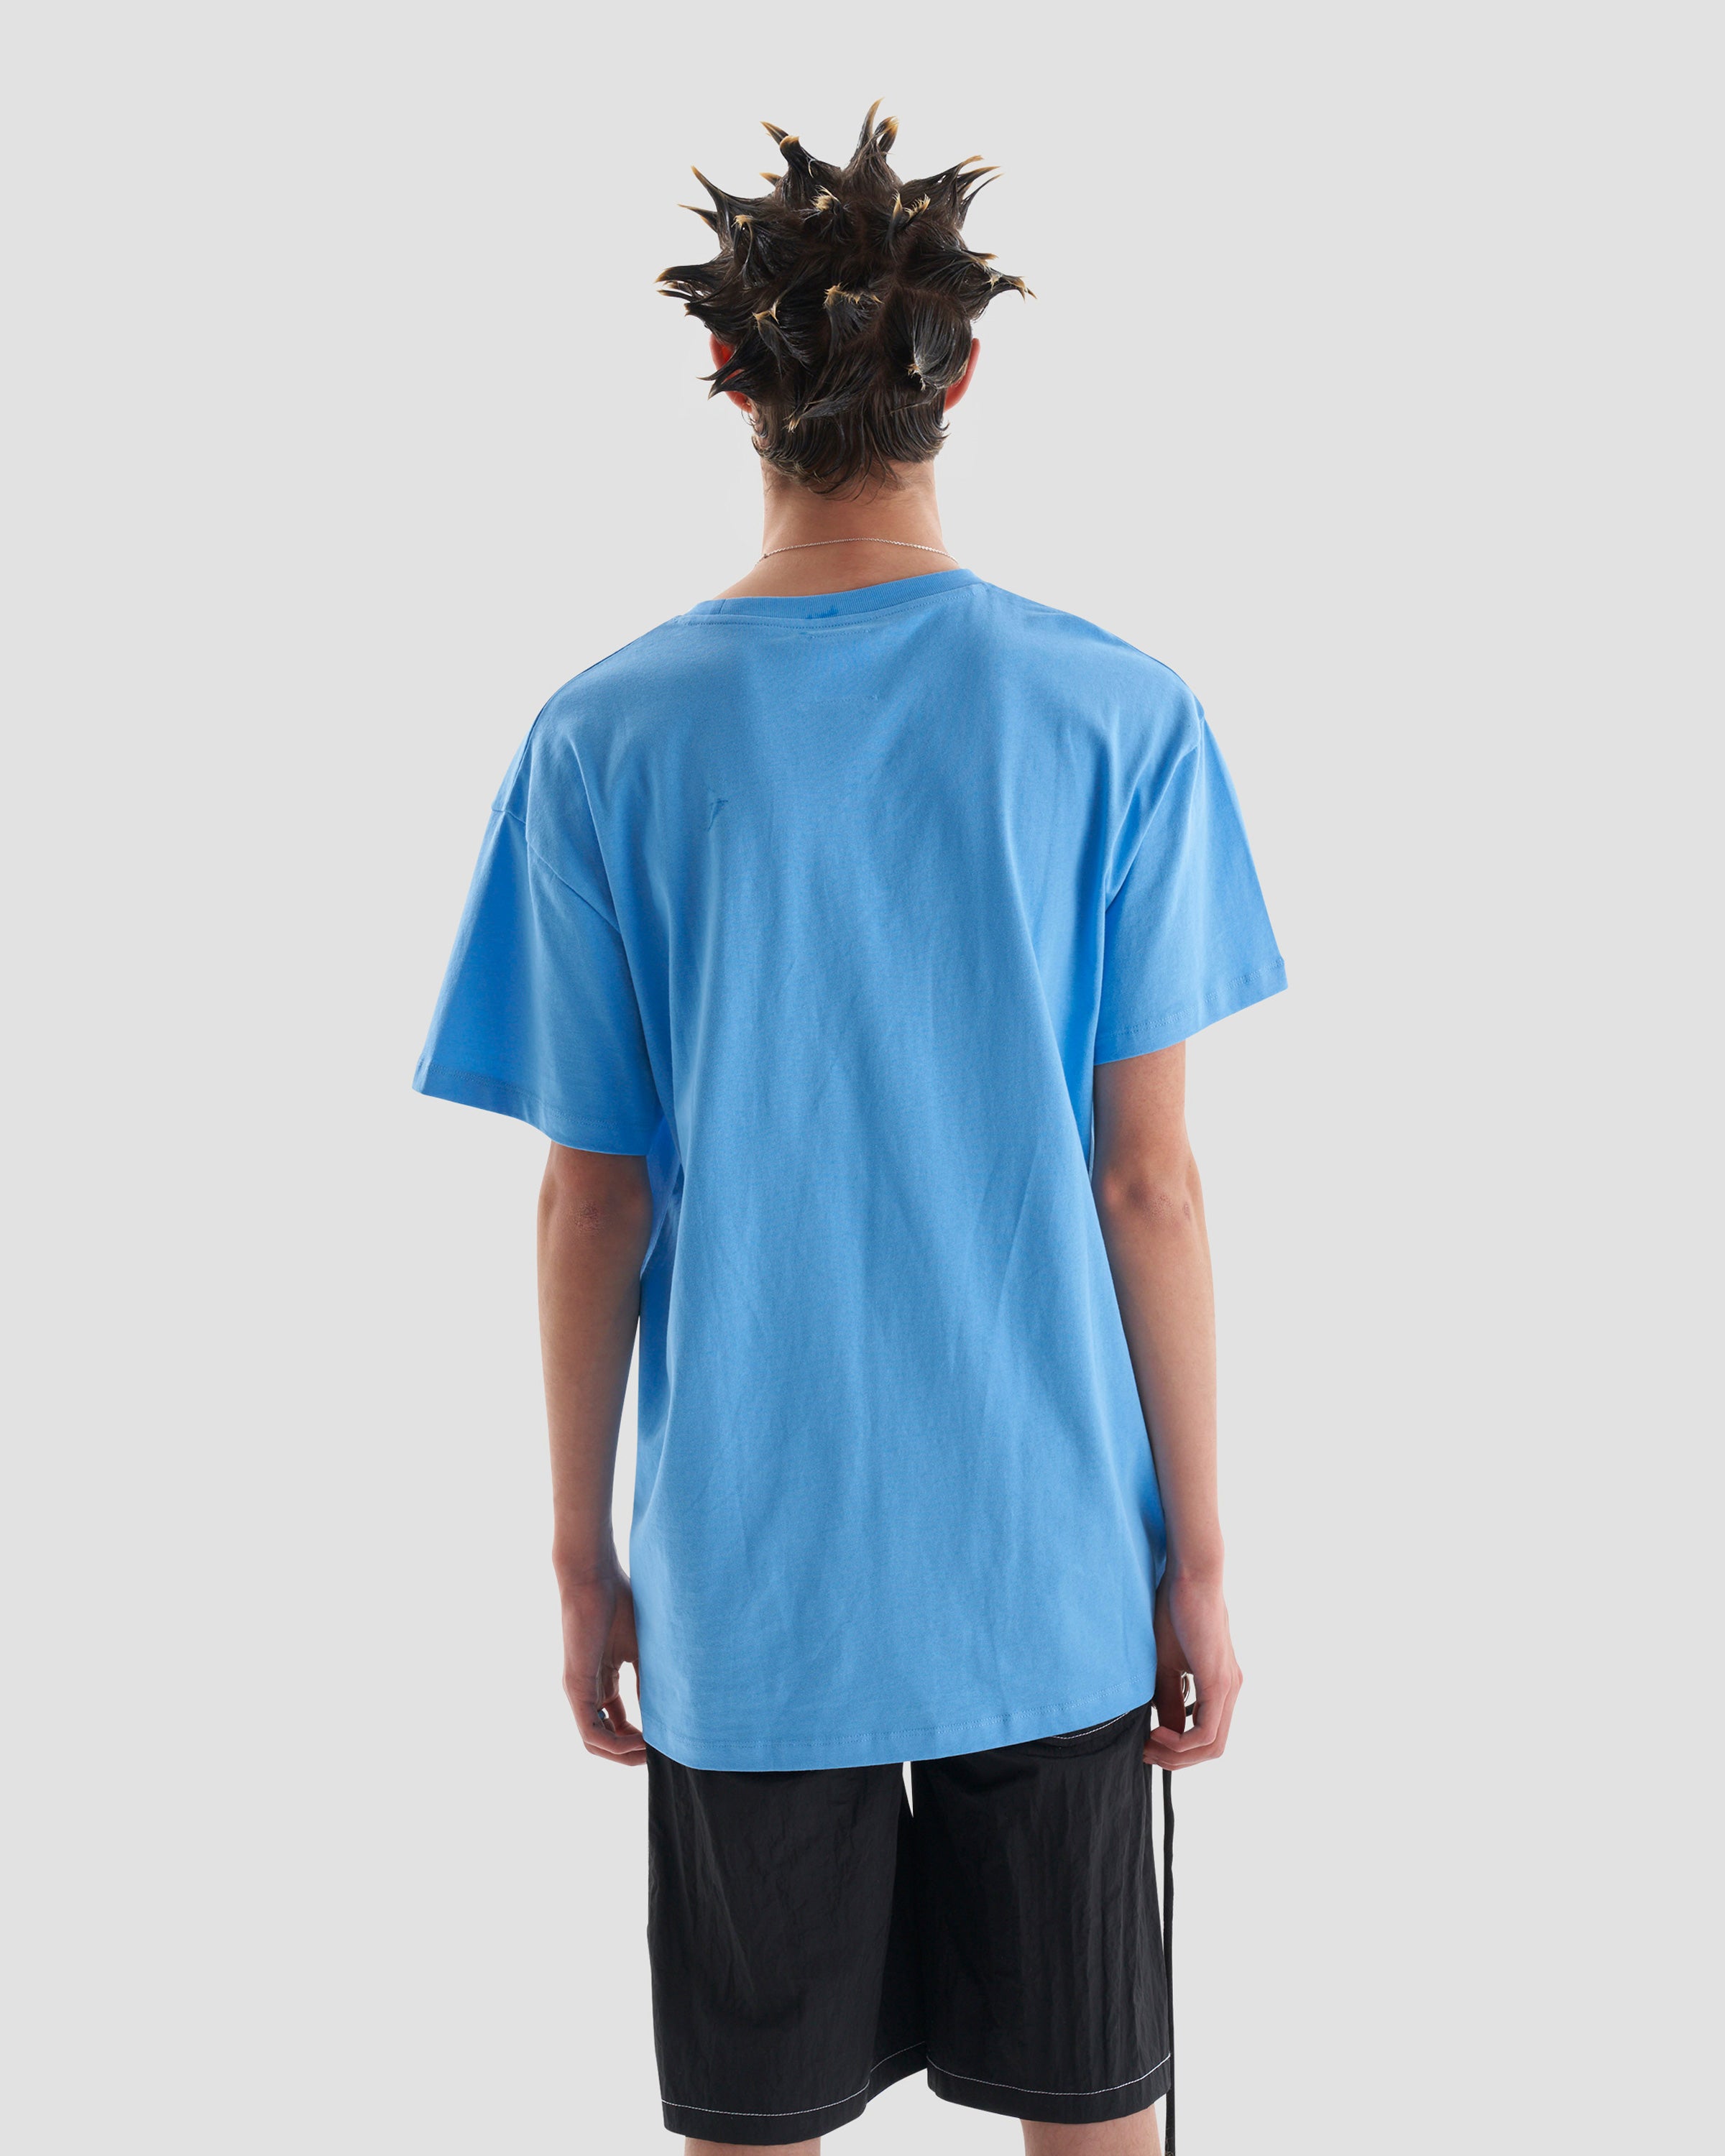 Nostalgia Graphic Oversized T-Shirt in Blue